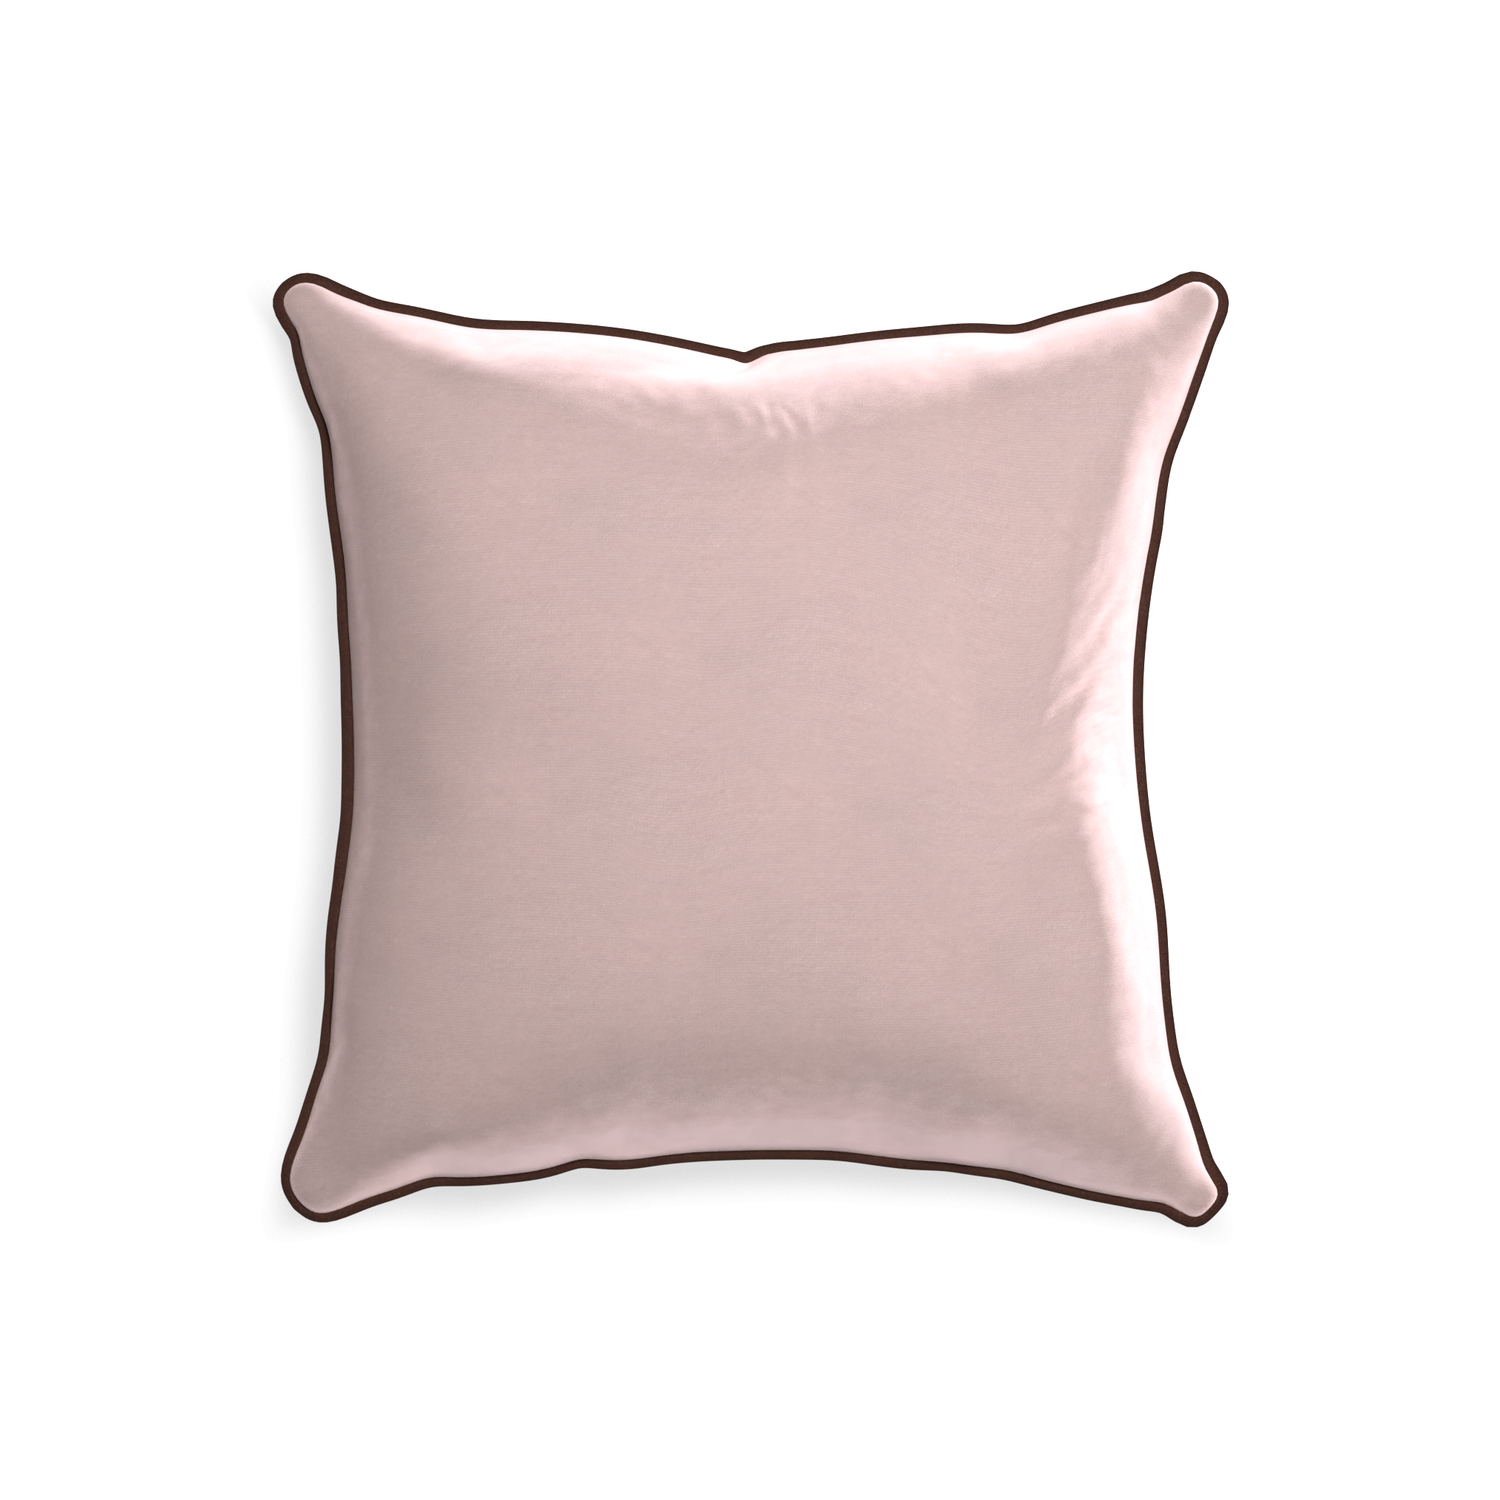 20-square rose velvet custom pillow with w piping on white background